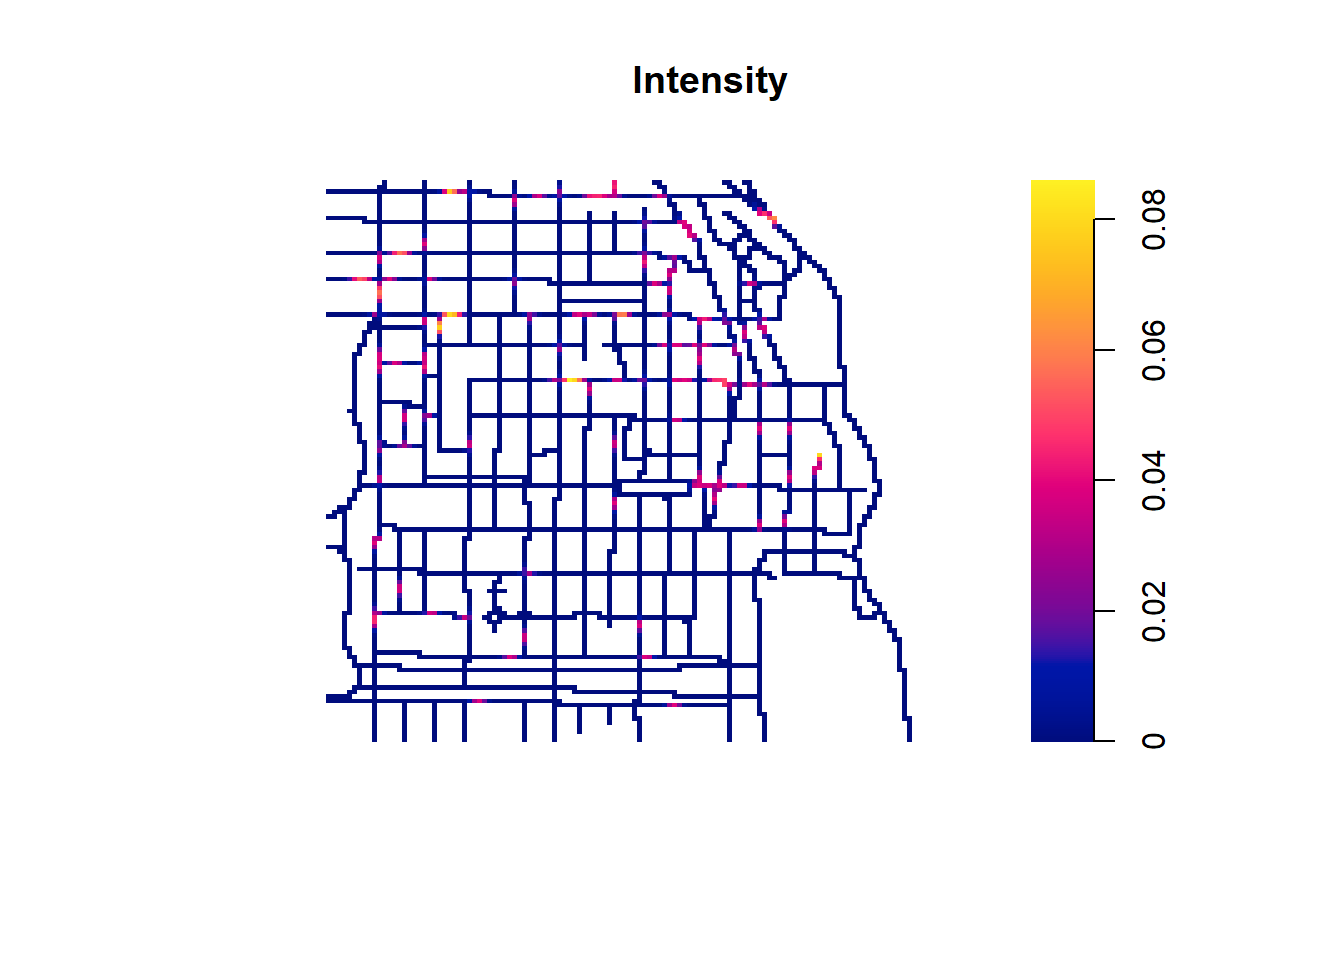 Crime locations by type (top) and intensity of crime locations (bottom) in an area of Chicago.